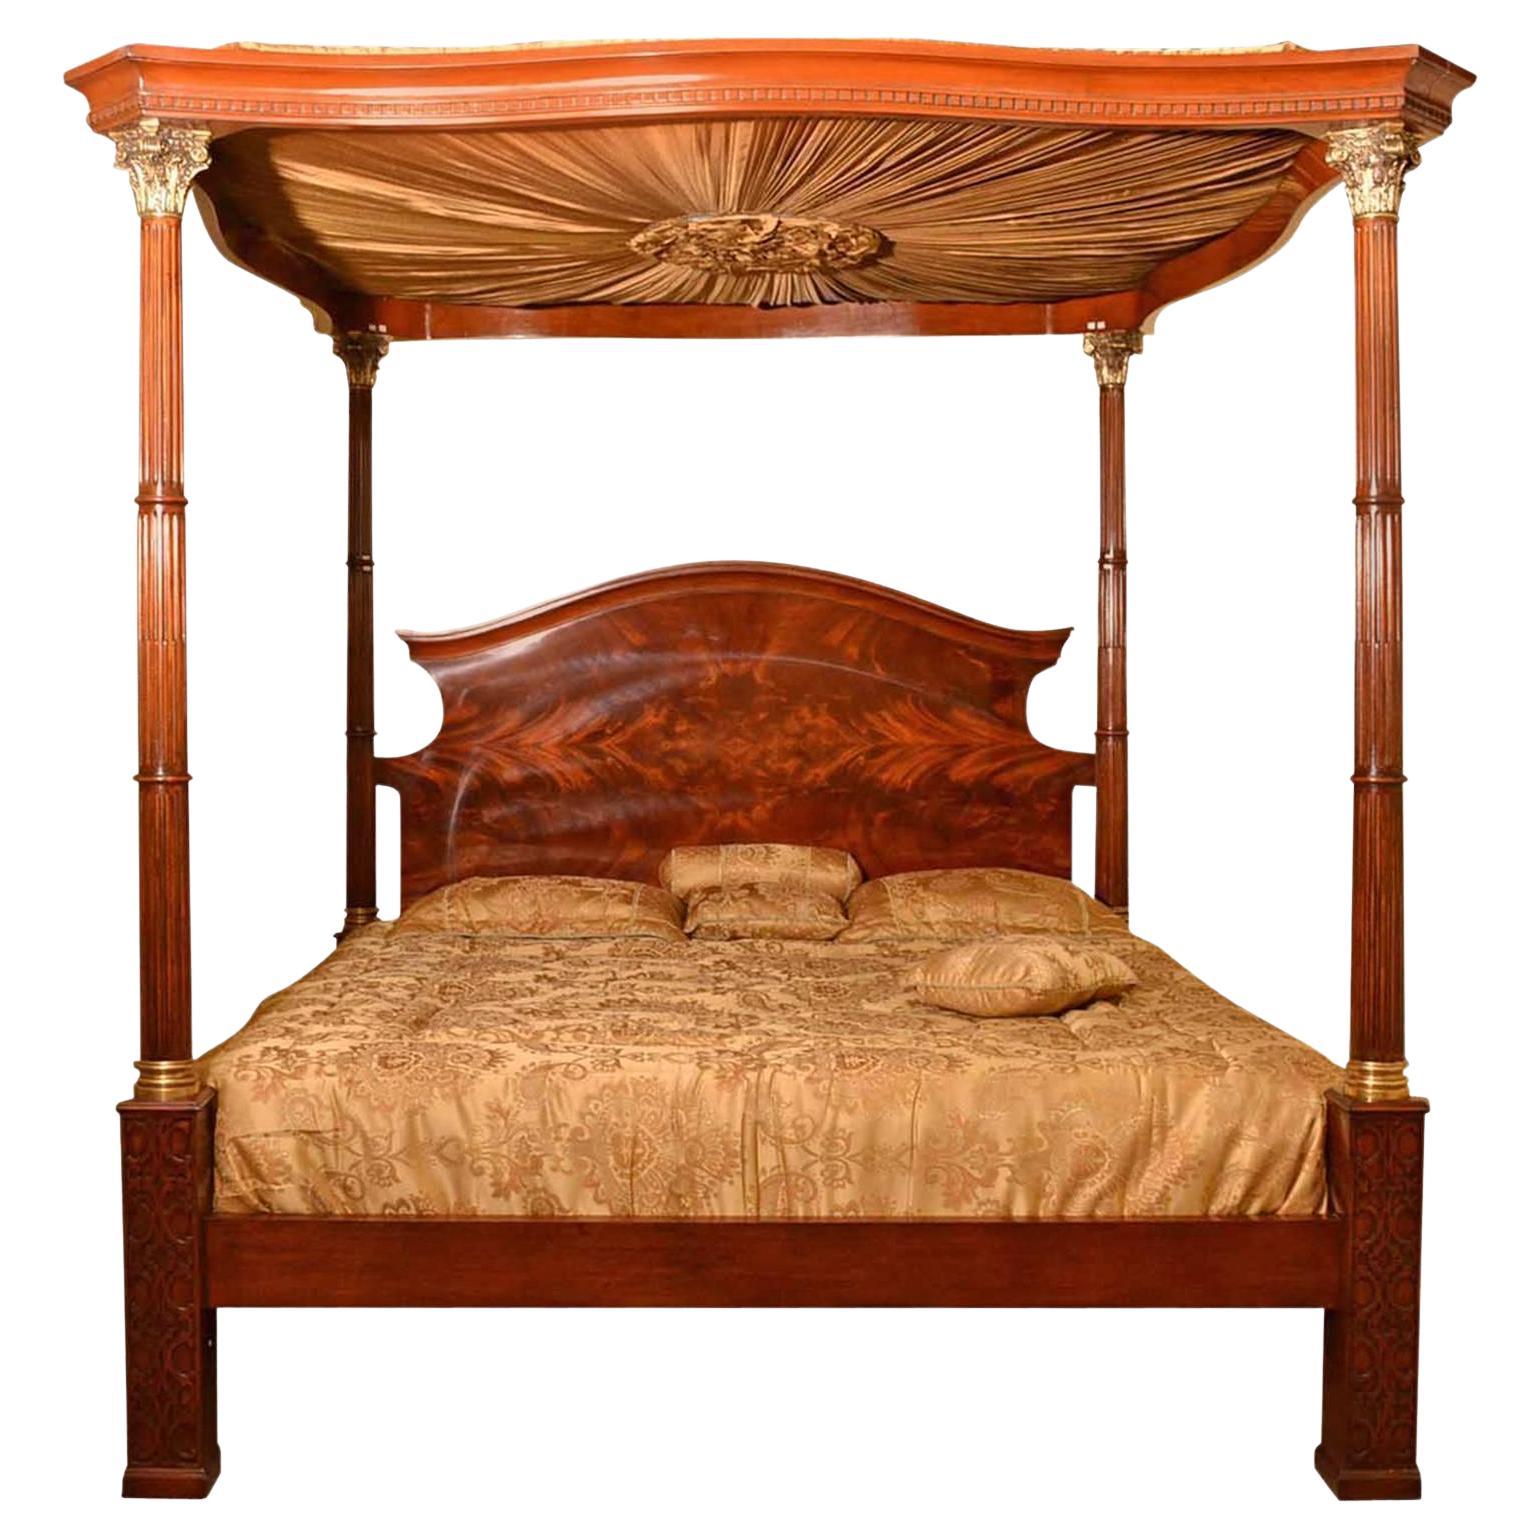 Vintage Super King Mahogany Four Poster Bed with Silk Canopy 20th C